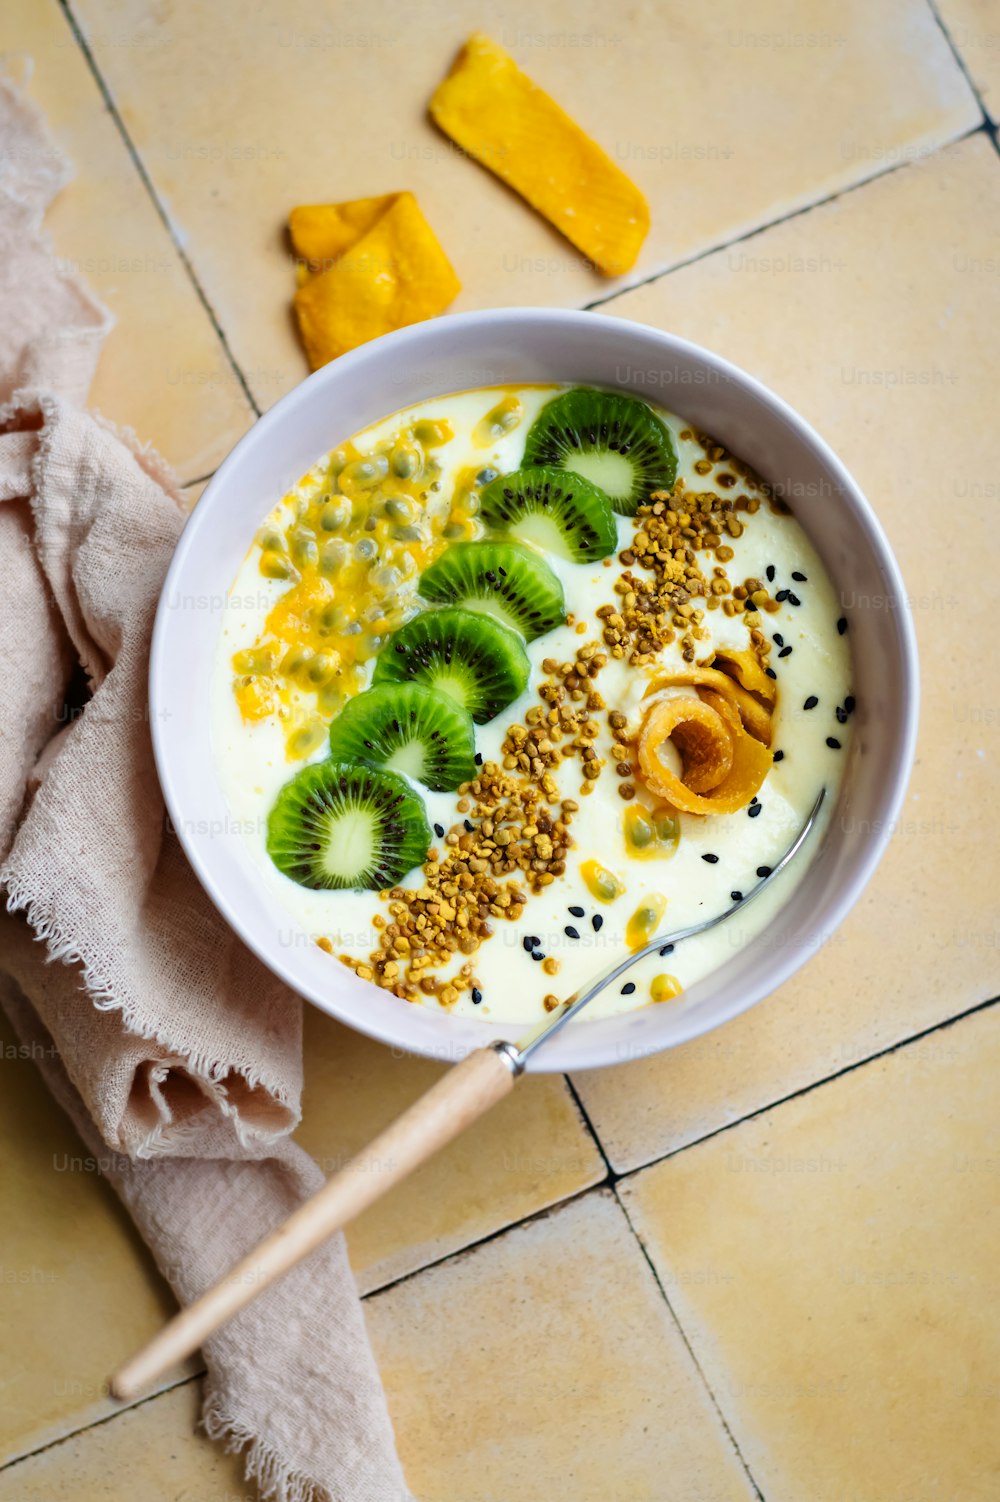 a bowl of yogurt with kiwis and nuts